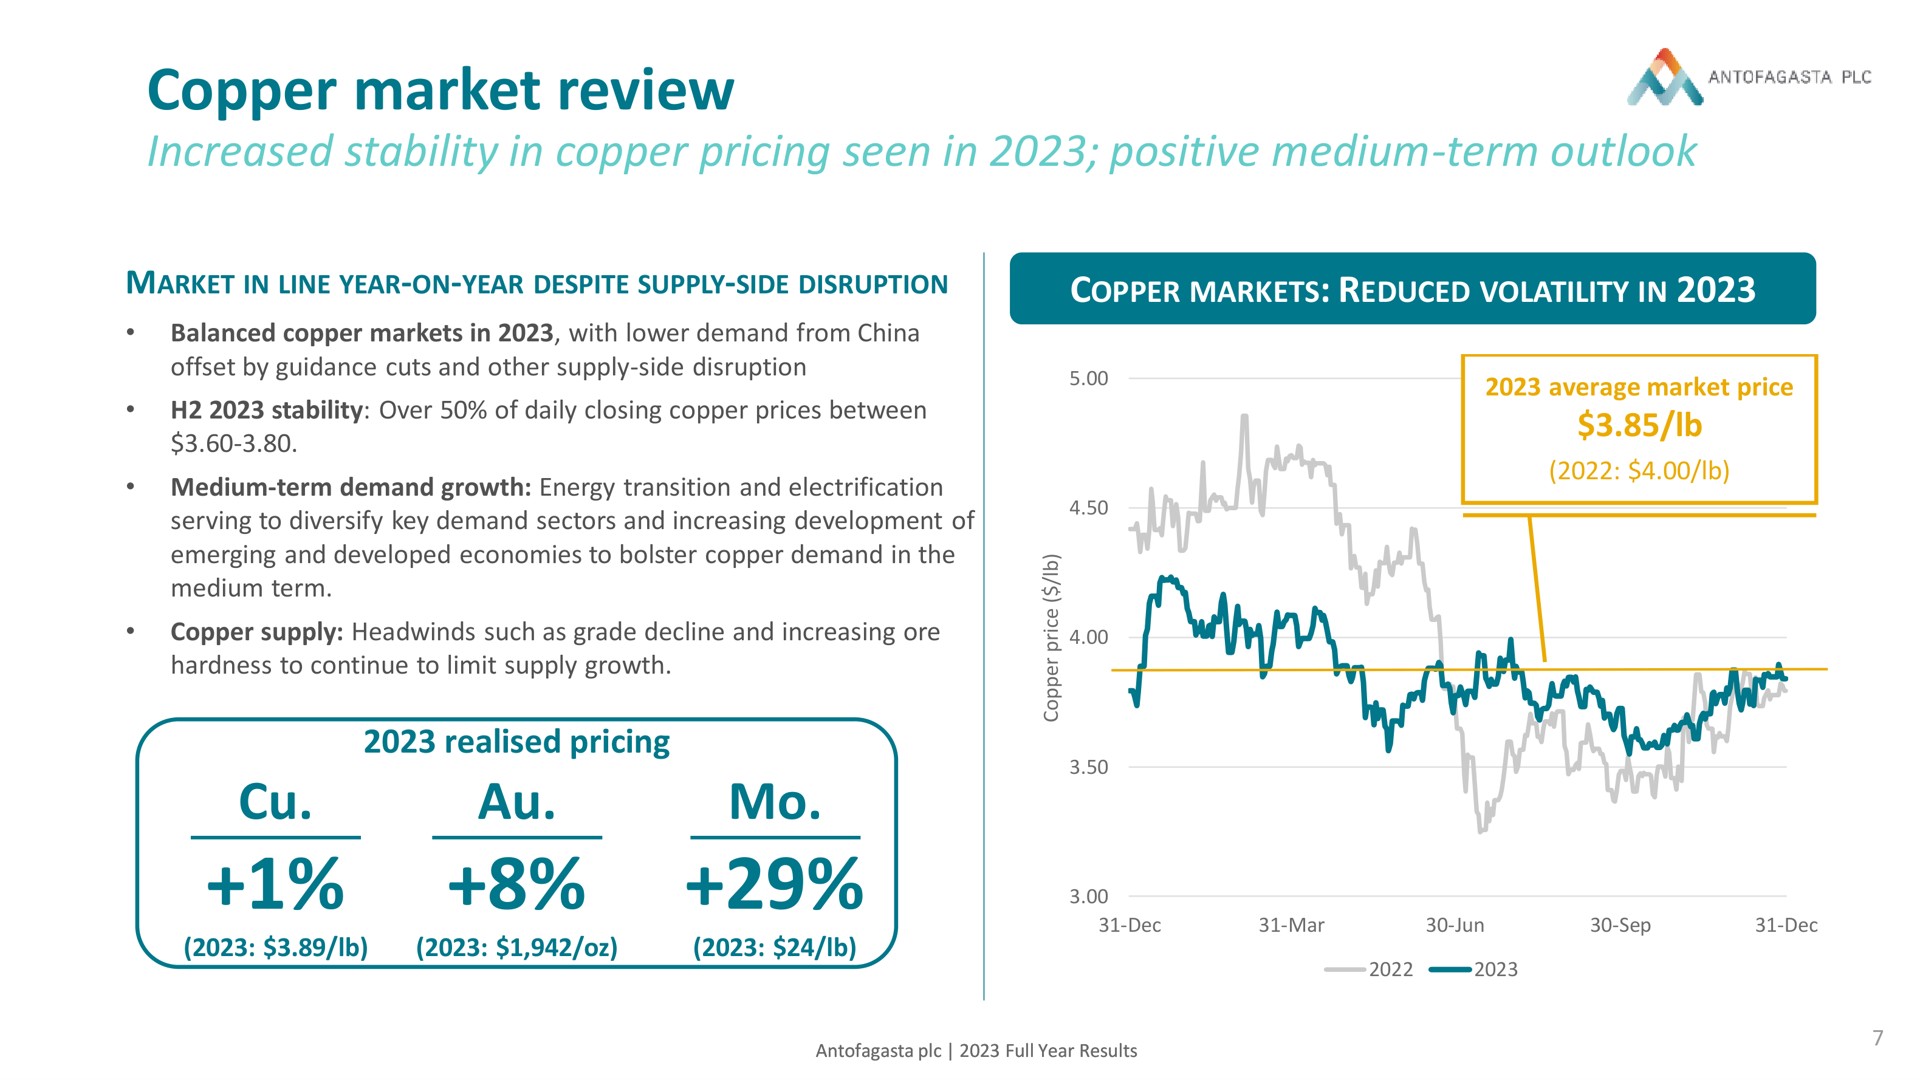 copper market review an increased stability in pricing seen in positive medium term outlook | Antofagasta